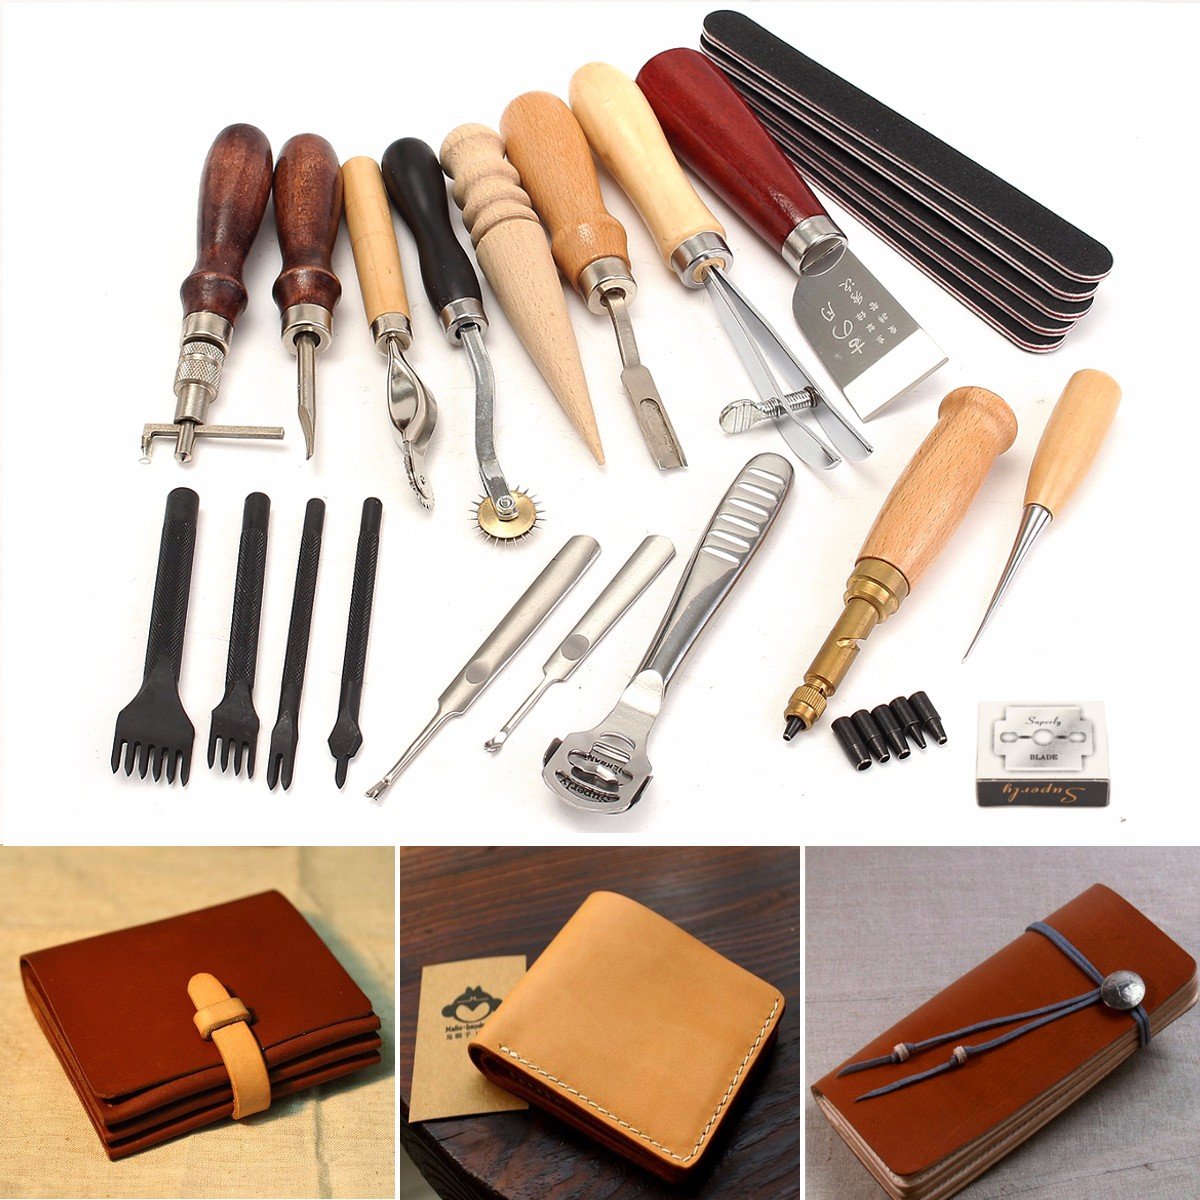 

20 Pcs/Set Leather Craft Punch Tool Kit Stitching Carving Working Sewing Saddle Groover